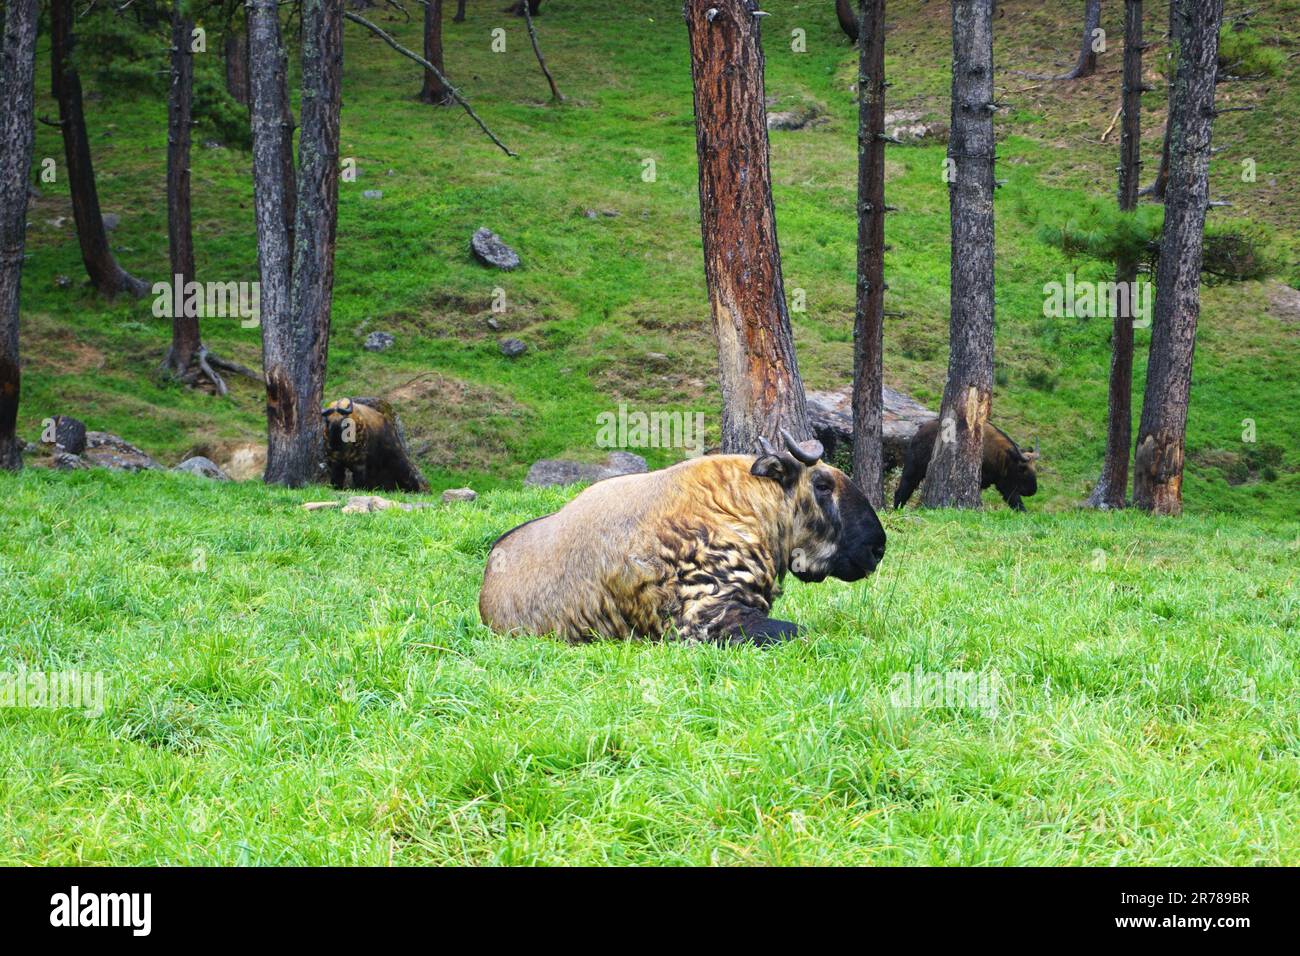 A mature Takin, Bhutan's national animal, lounges in the grass while others graze behind at the Motithang Royal Takin Preserve, Thimphu, Bhutan. Stock Photo